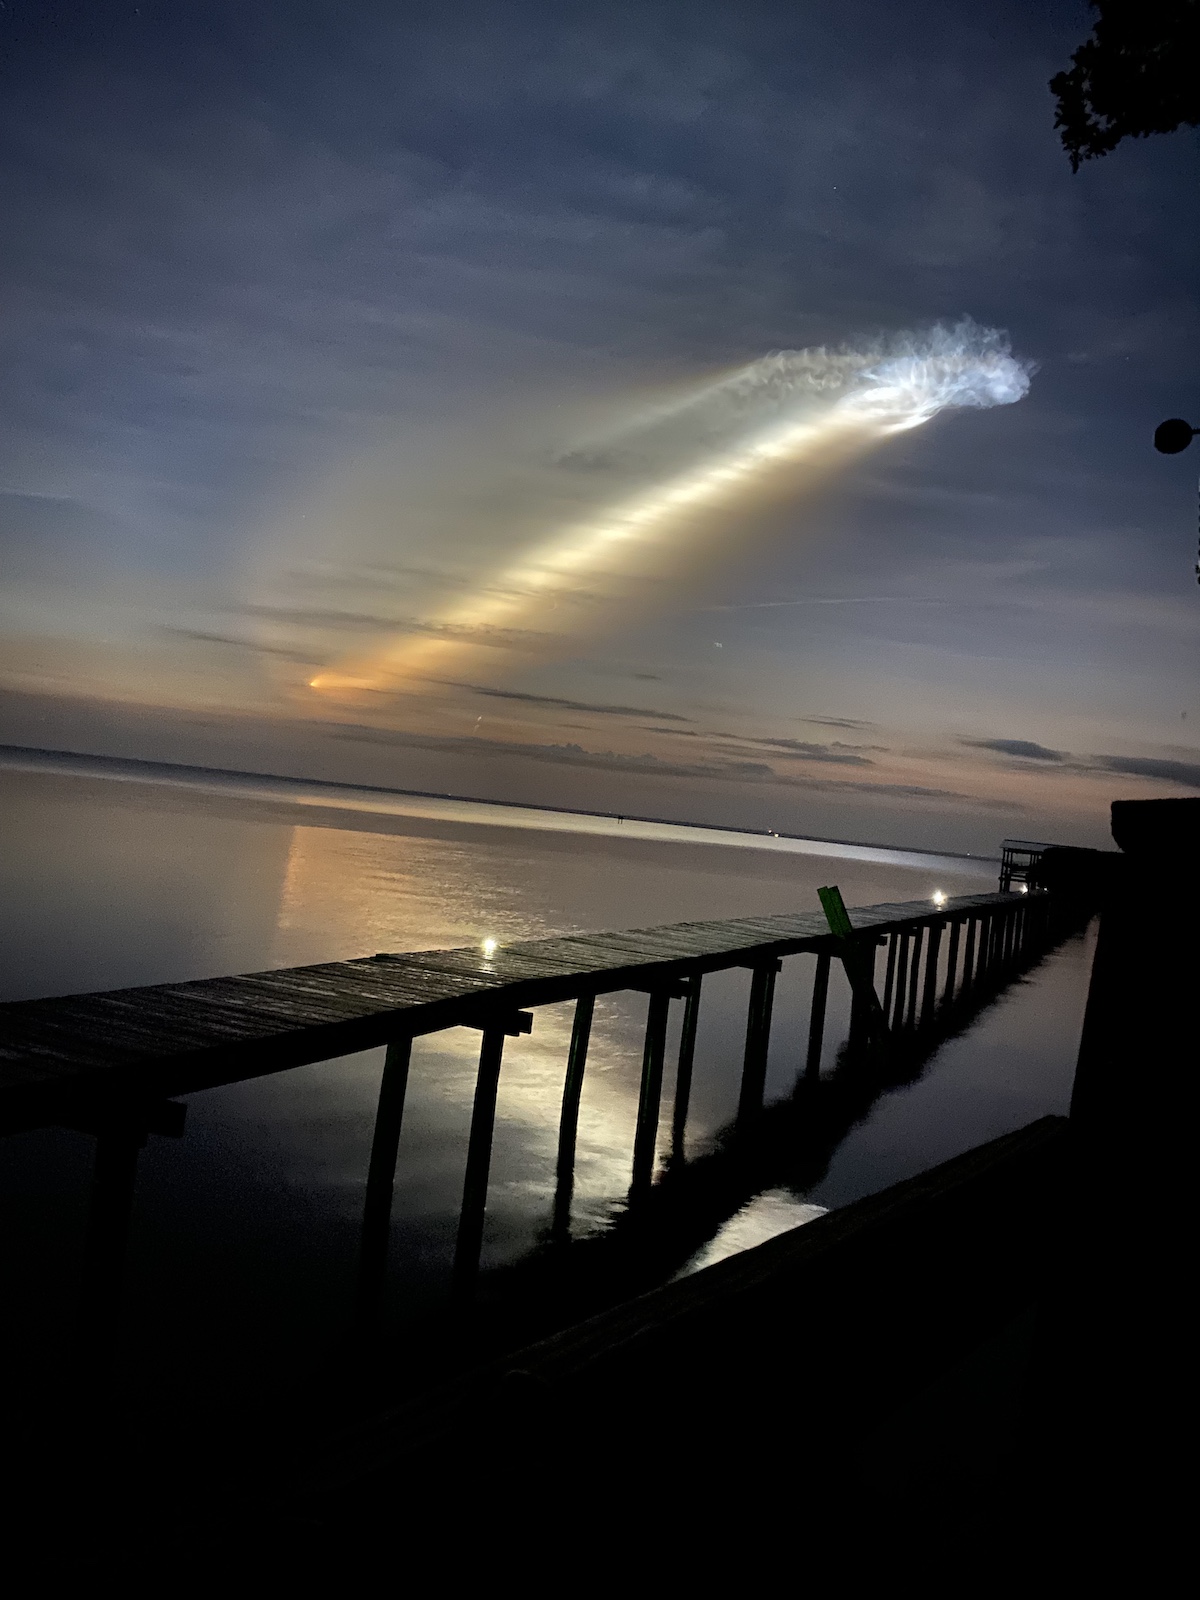 SpaceX Falcon 9 Launch Over The Ocala National Forest